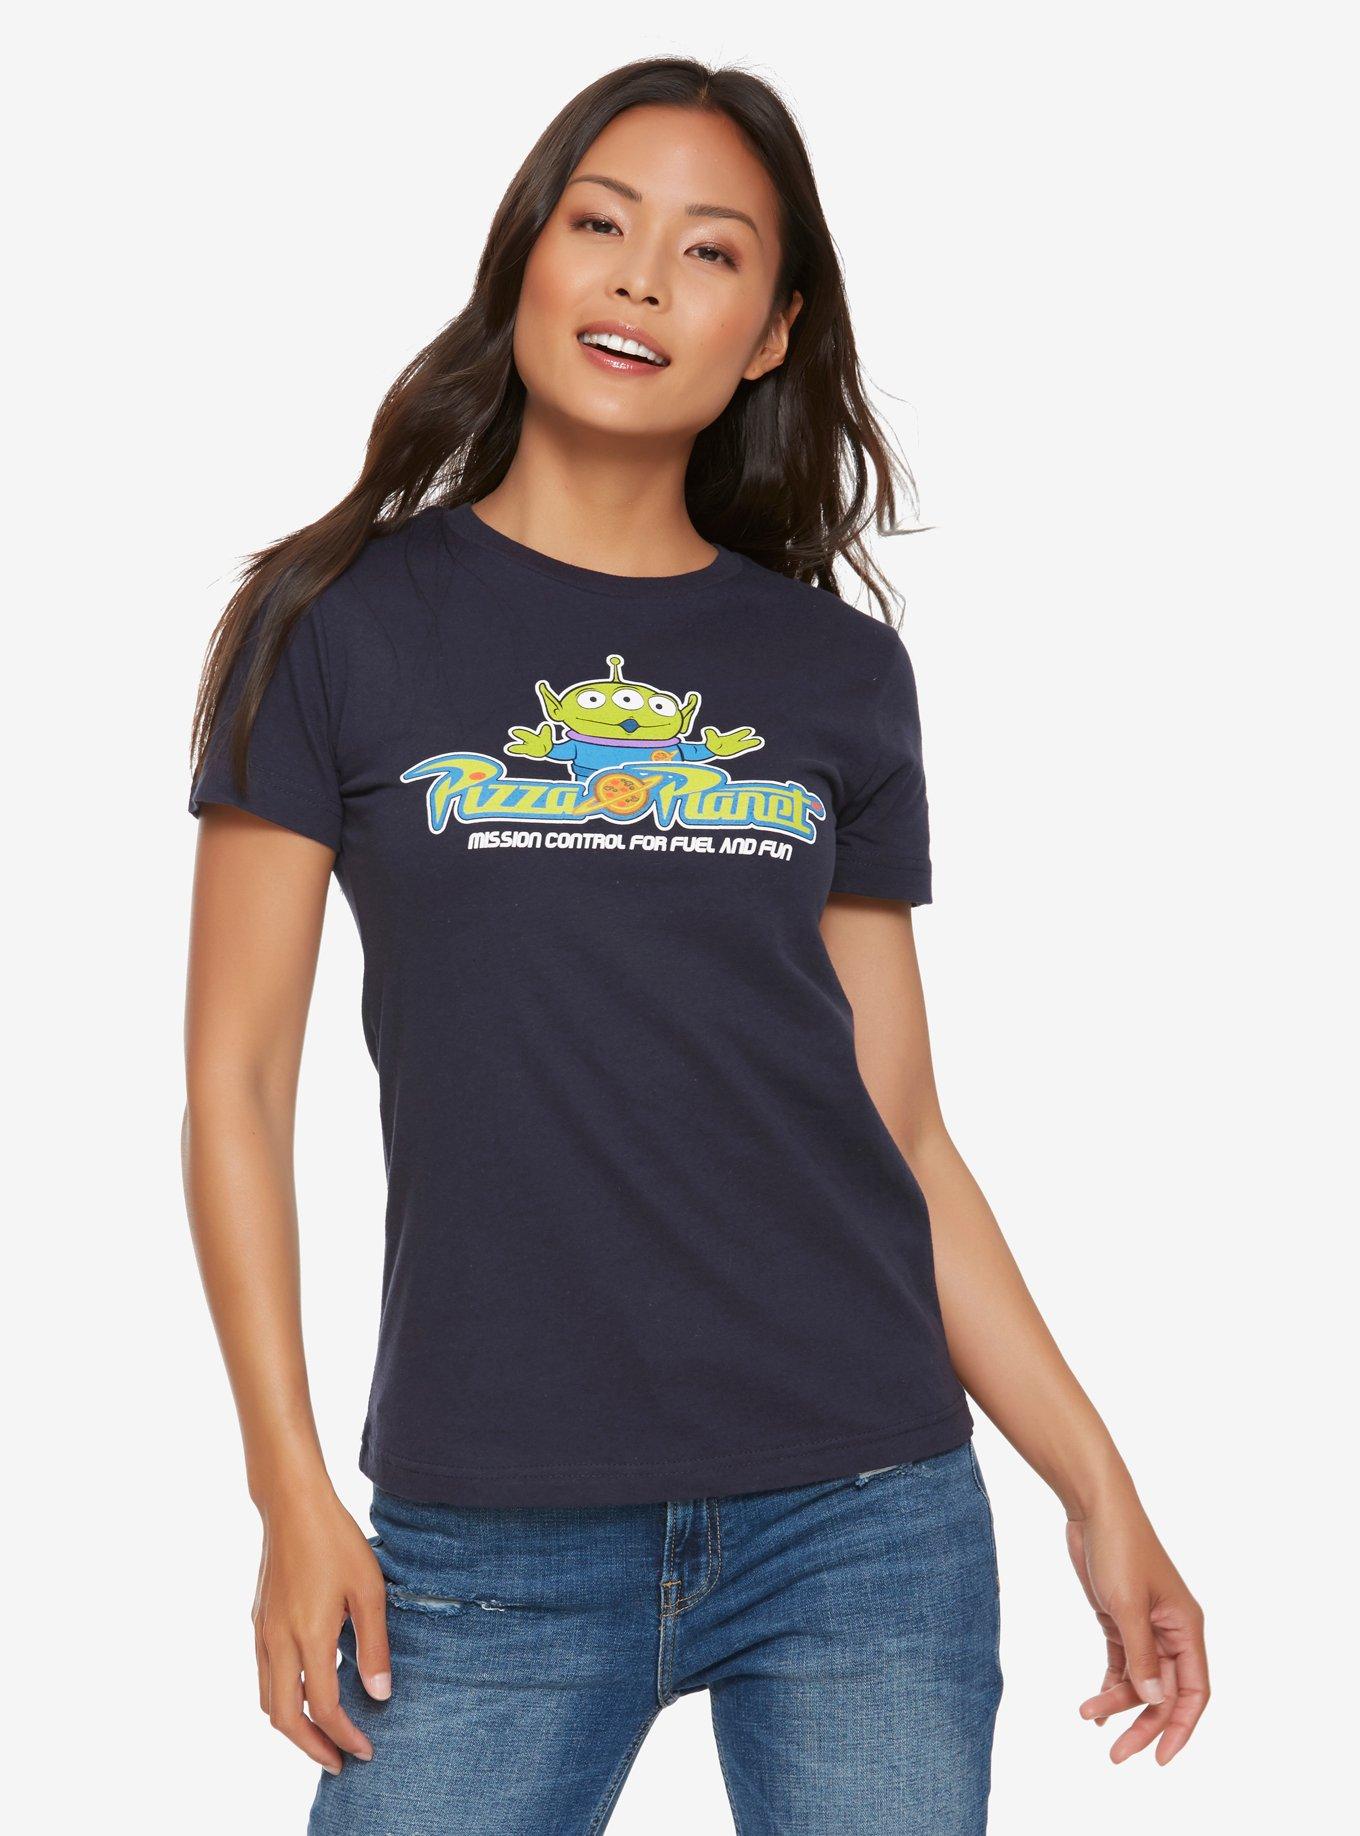 Disney Pixar Toy Story Land Pizza Planet Womens Tee - BoxLunch Exclusive, MULTI, hi-res